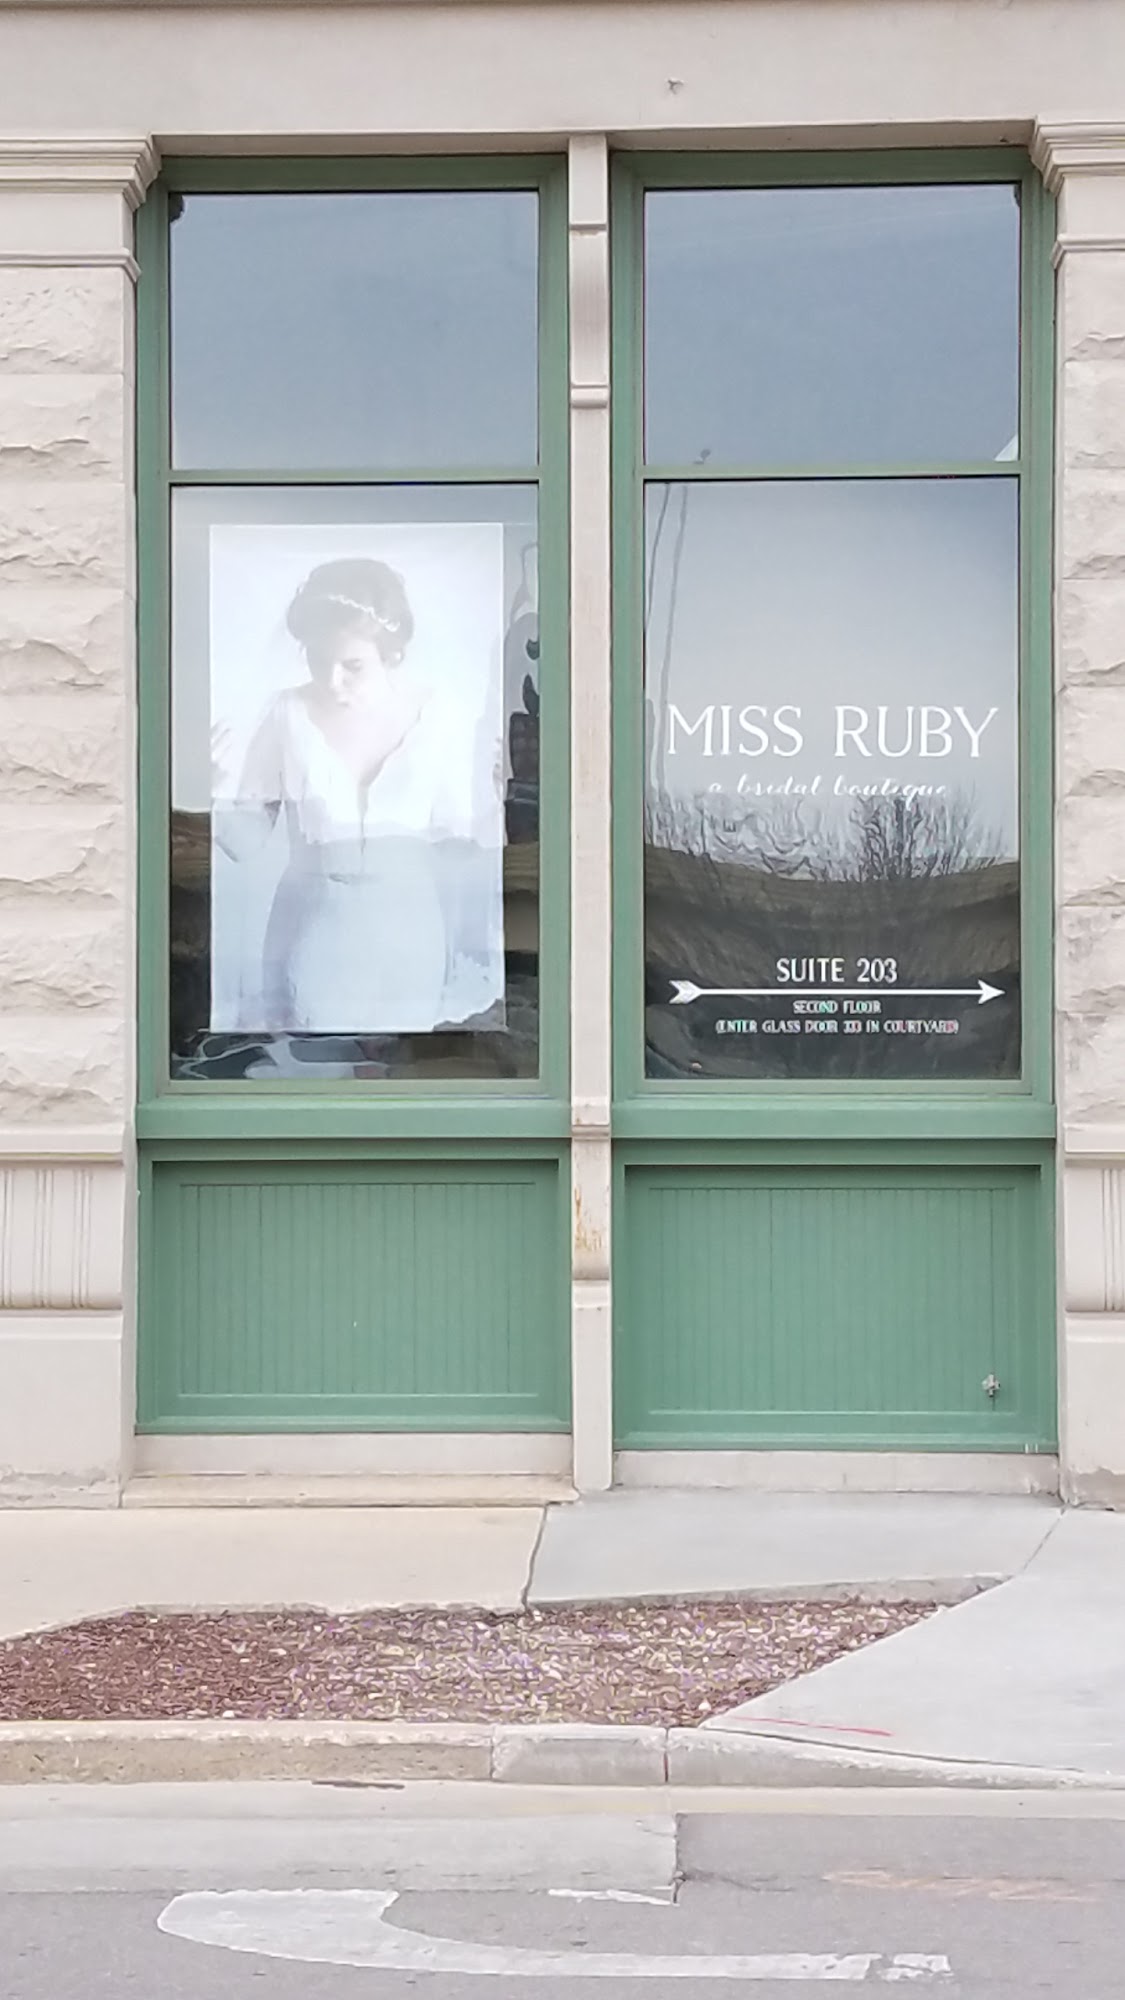 Miss Ruby - A Bridal Boutique